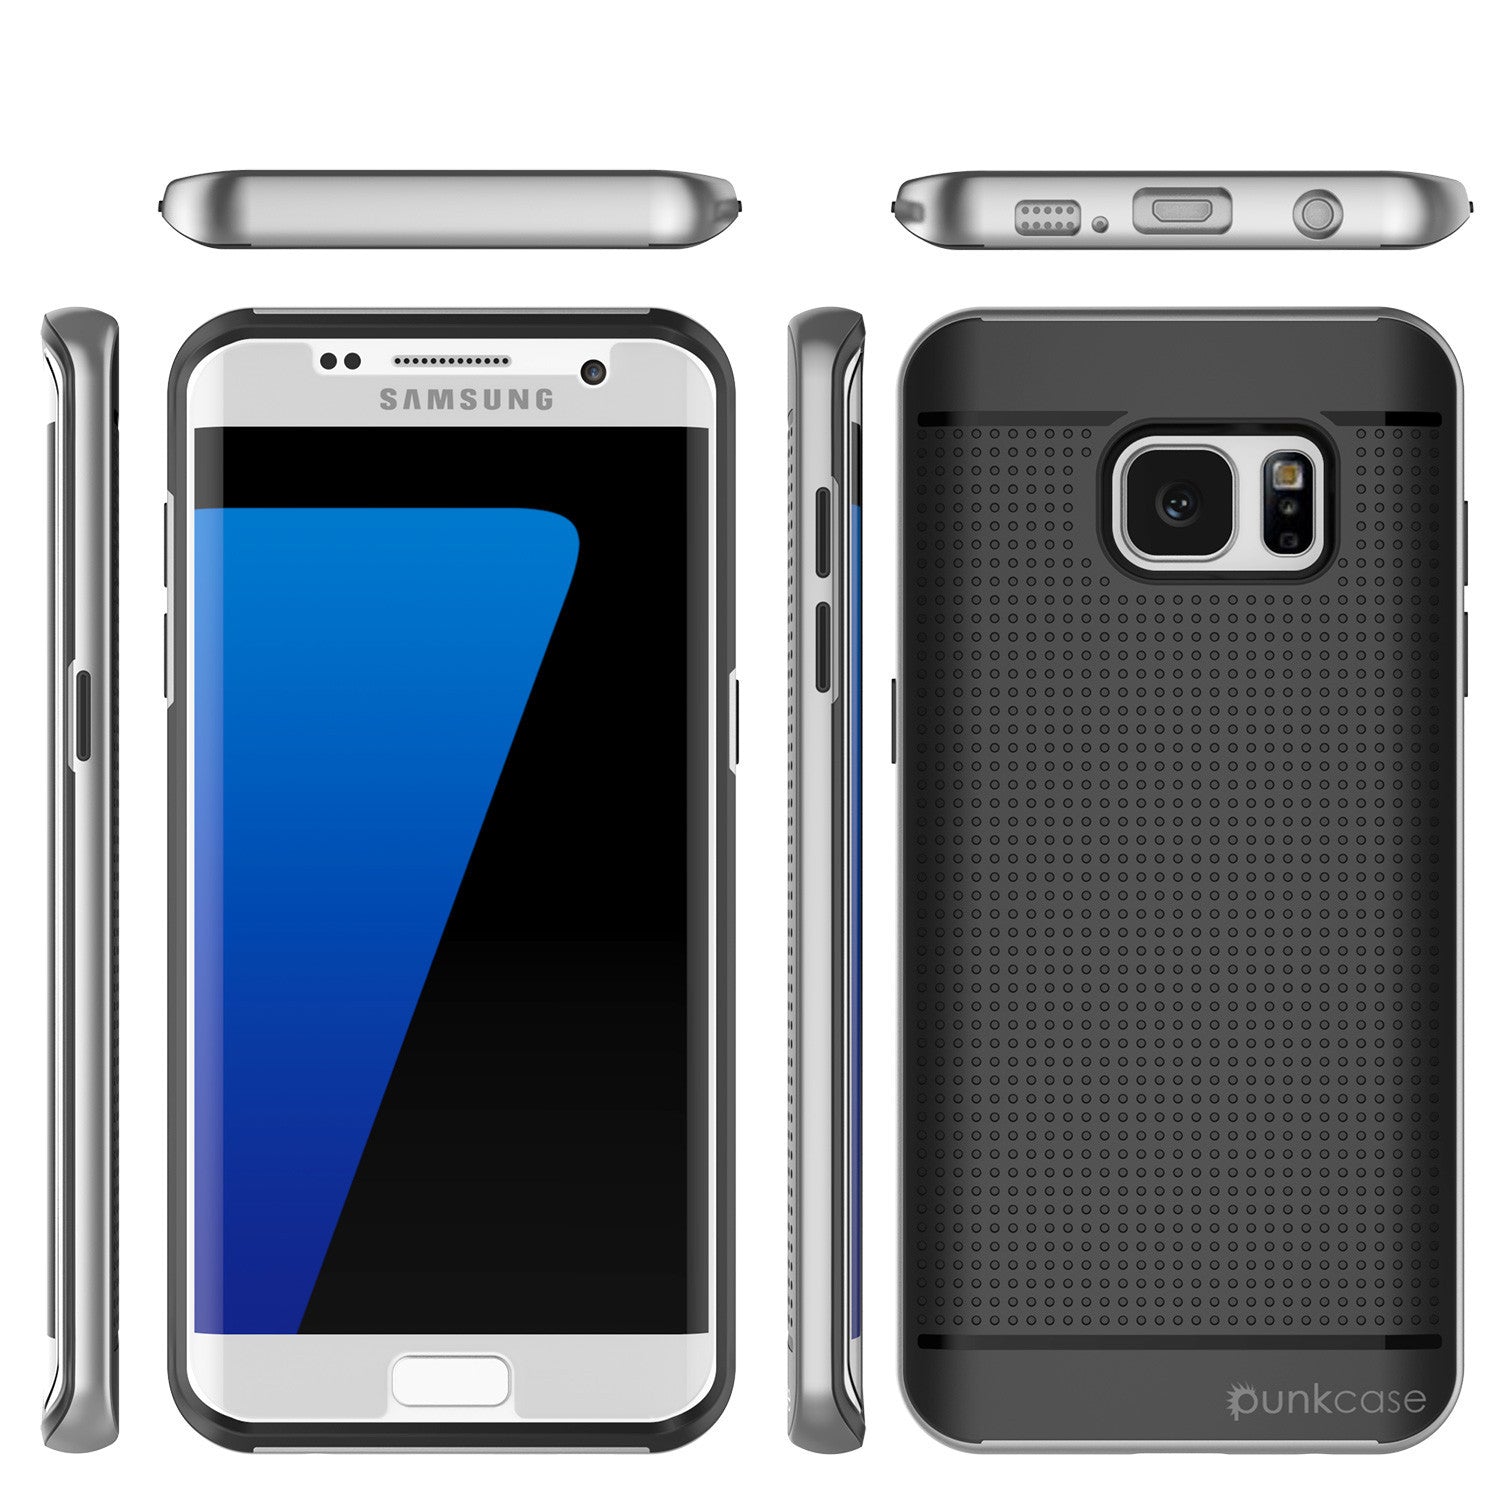 Galaxy S7 Edge Case, Punkcase Stealth Navy Blue Series Hybrid 3-Piece Shockproof Dual Layer Cover